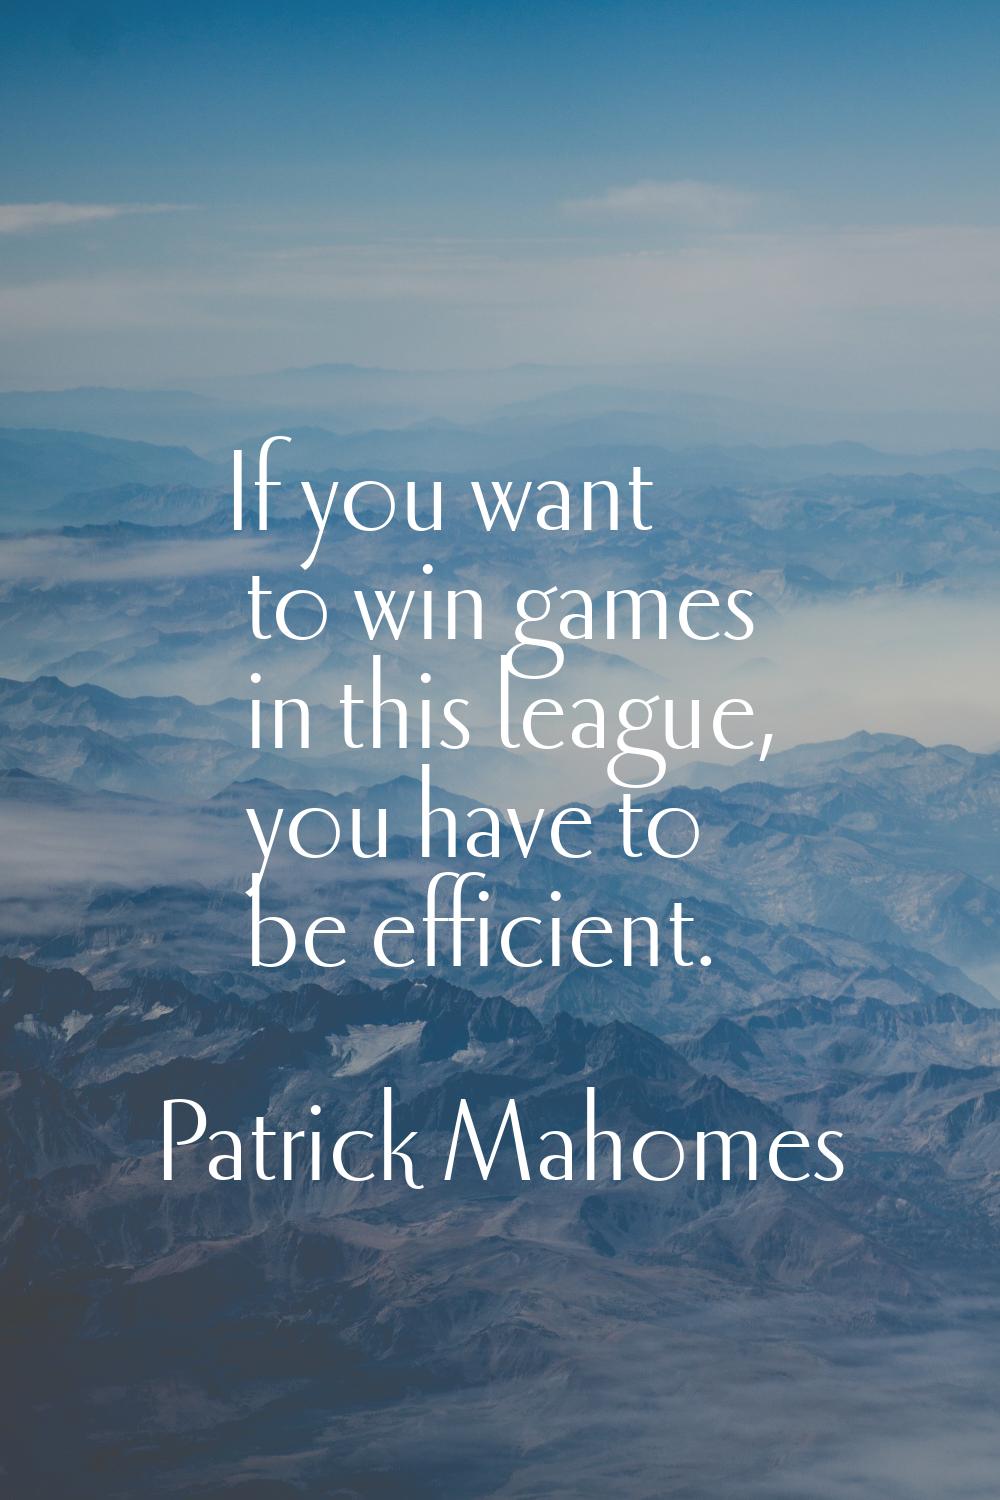 If you want to win games in this league, you have to be efficient.